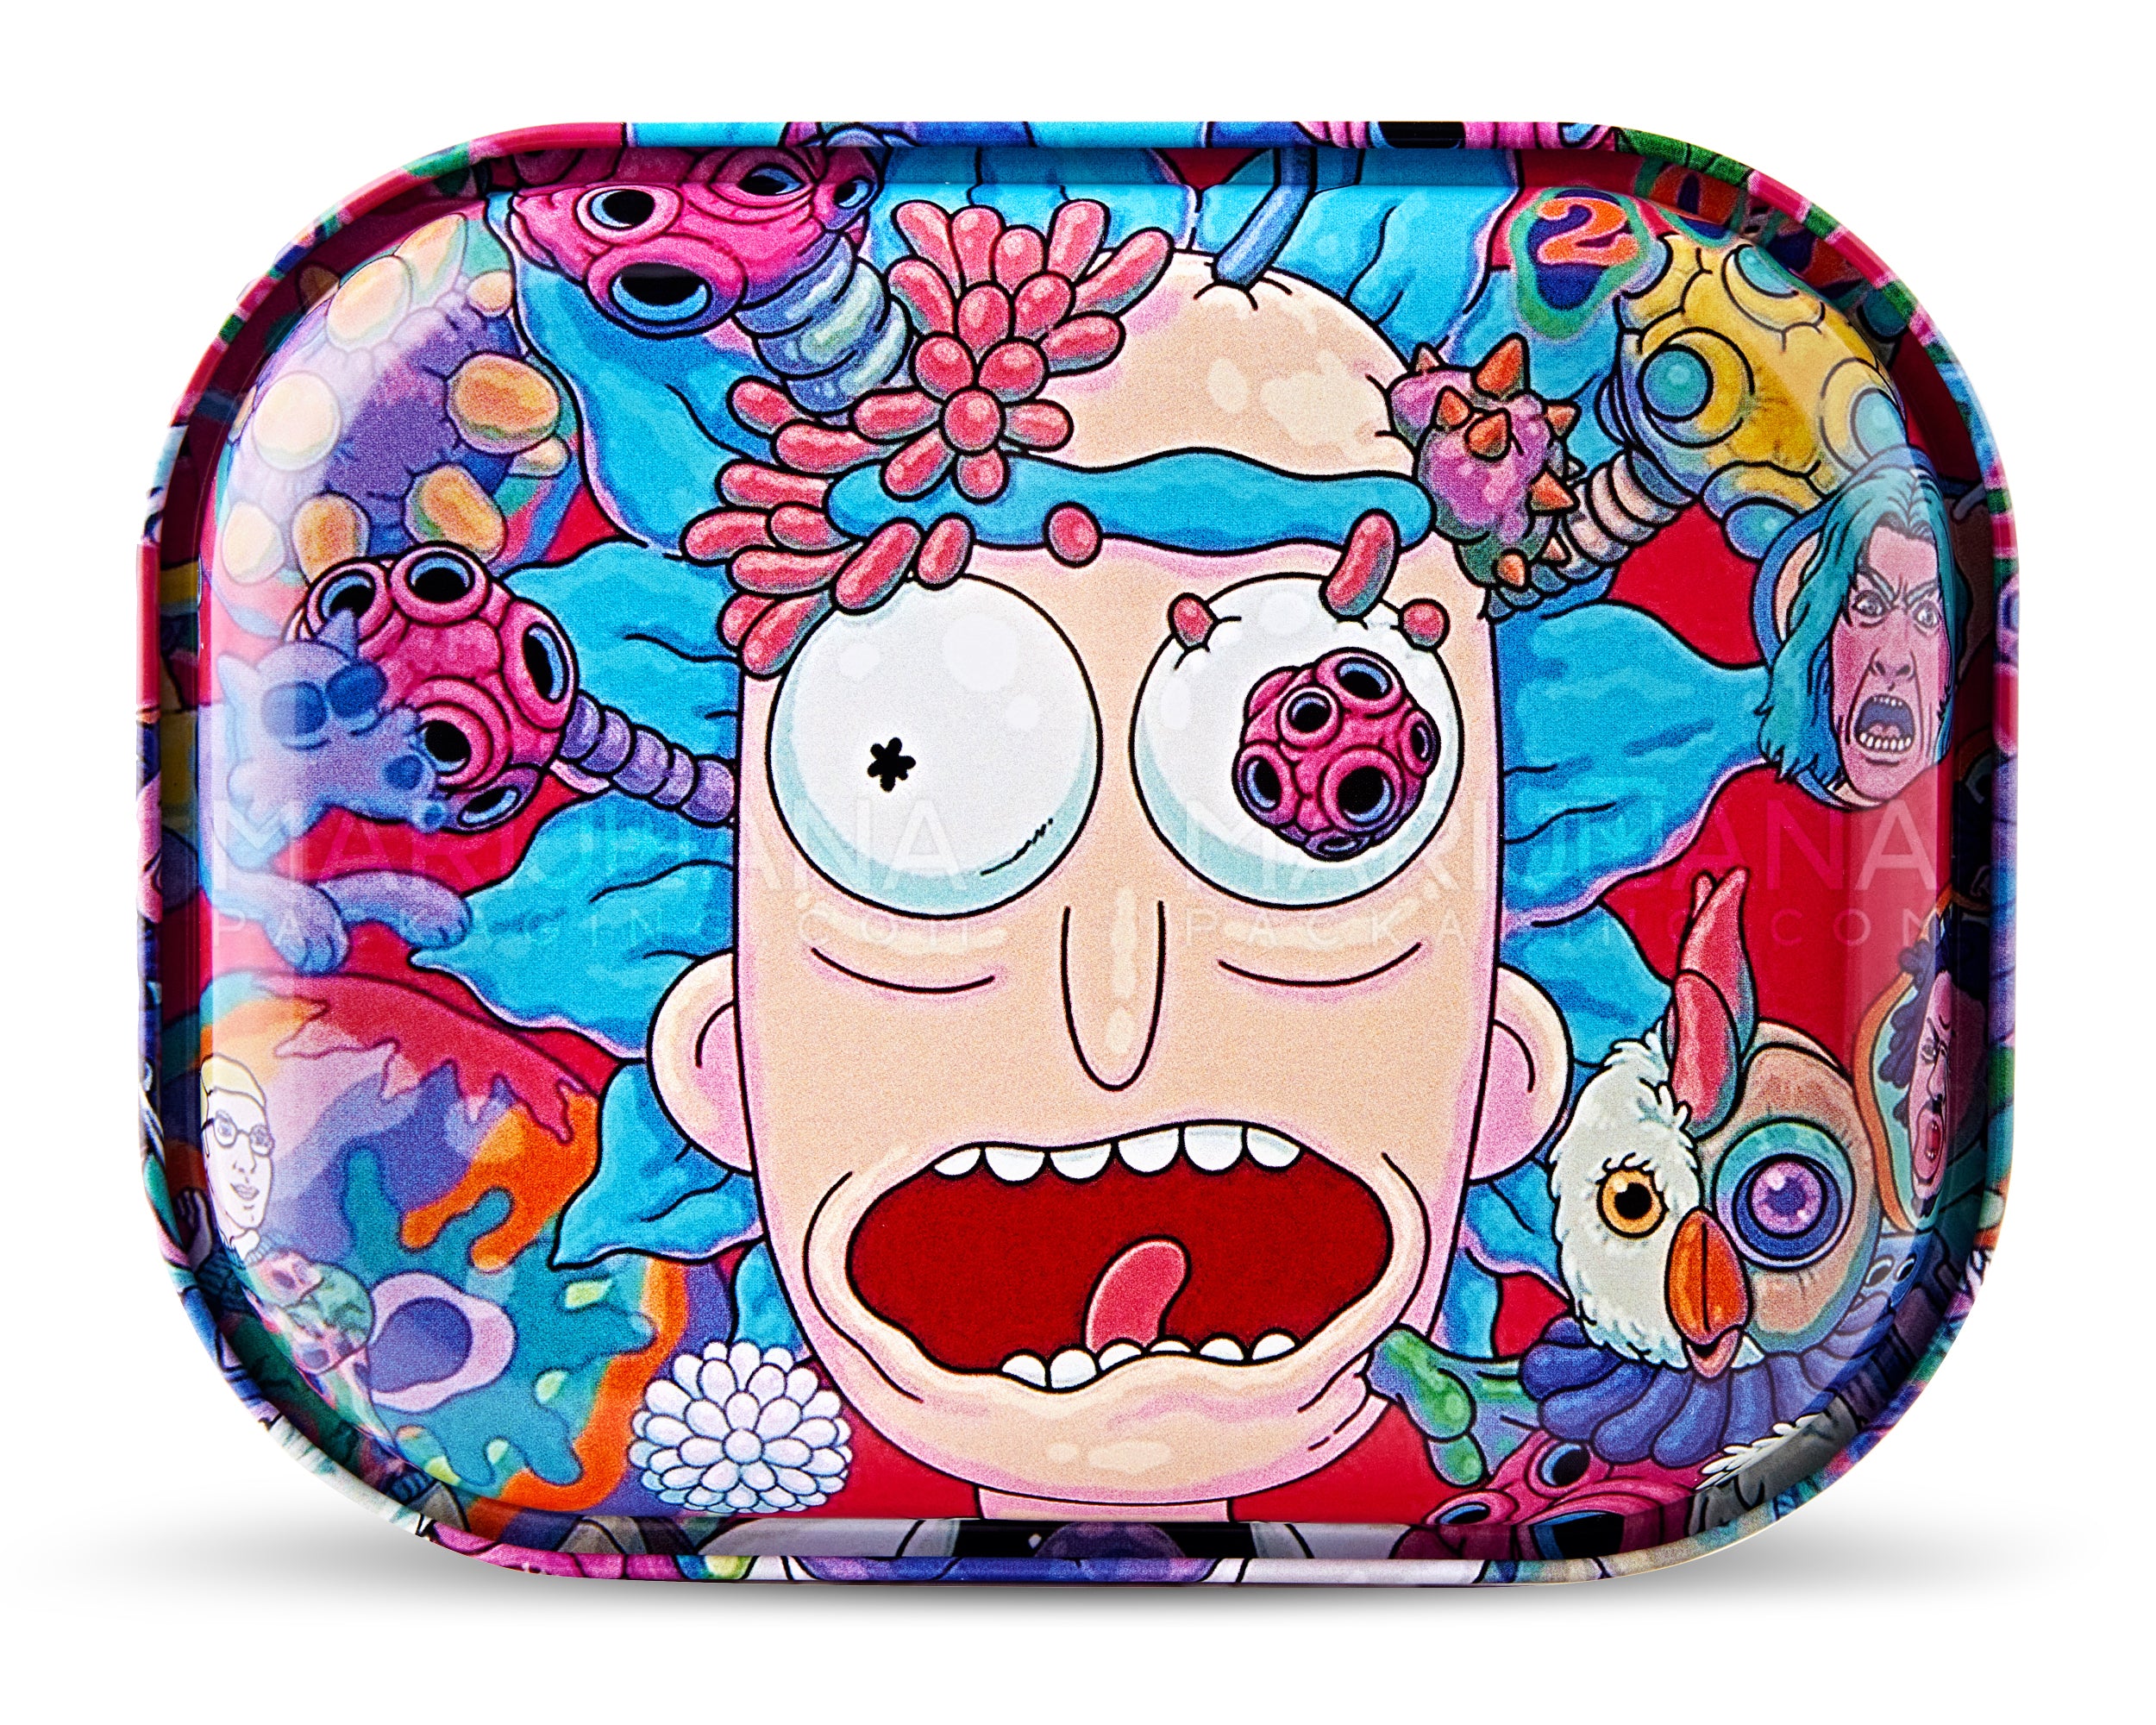 R&M Trippy Rolling Tray w/ Magnetic Cover | 7in x 5.5in - Mini - Metal